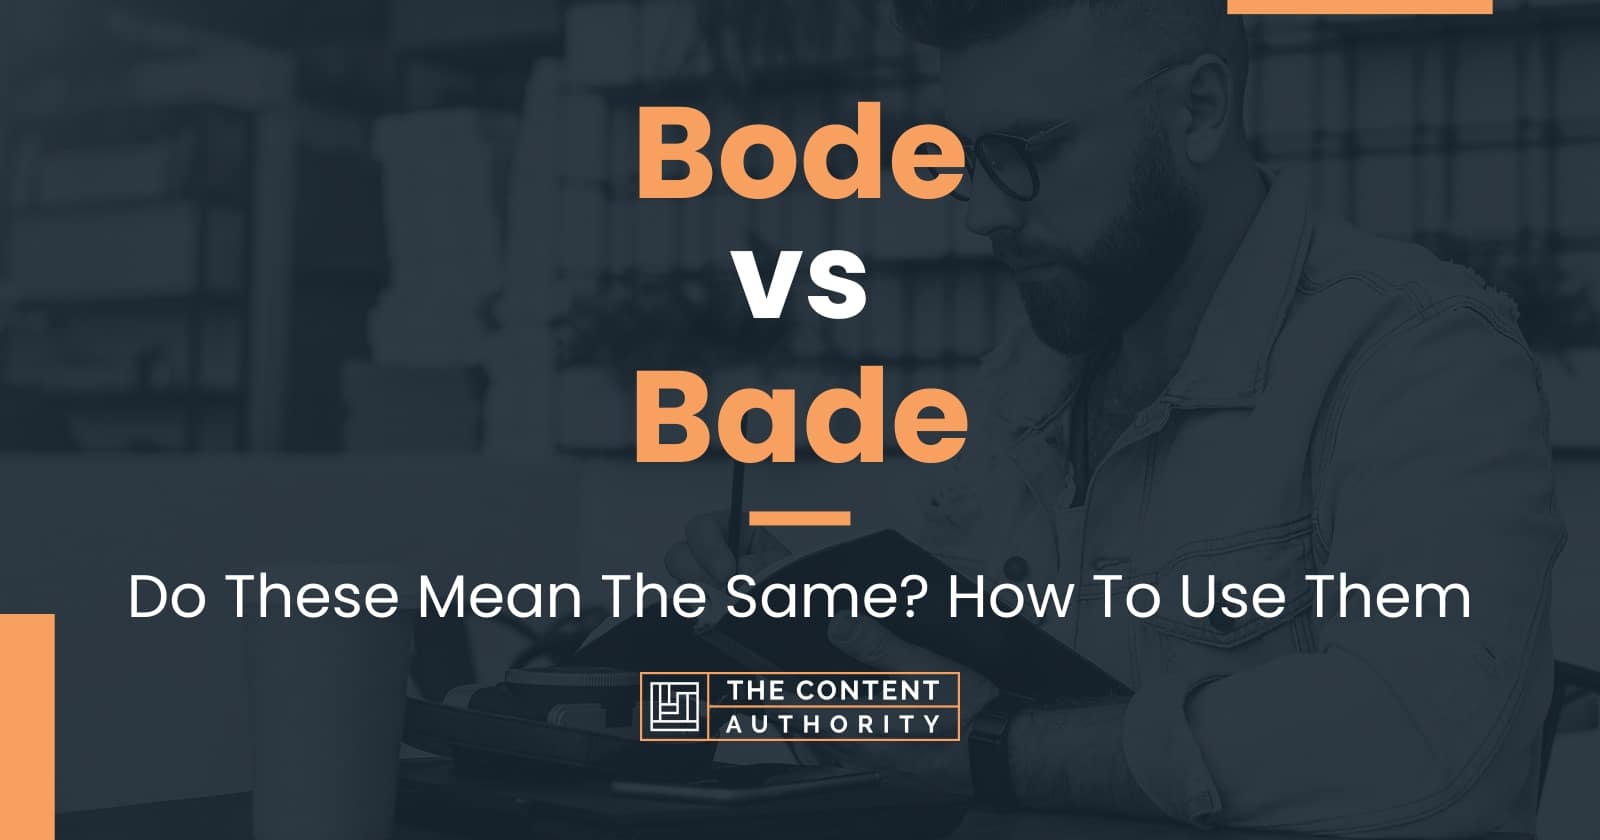 Bode vs Bade Do These Mean The Same? How To Use Them